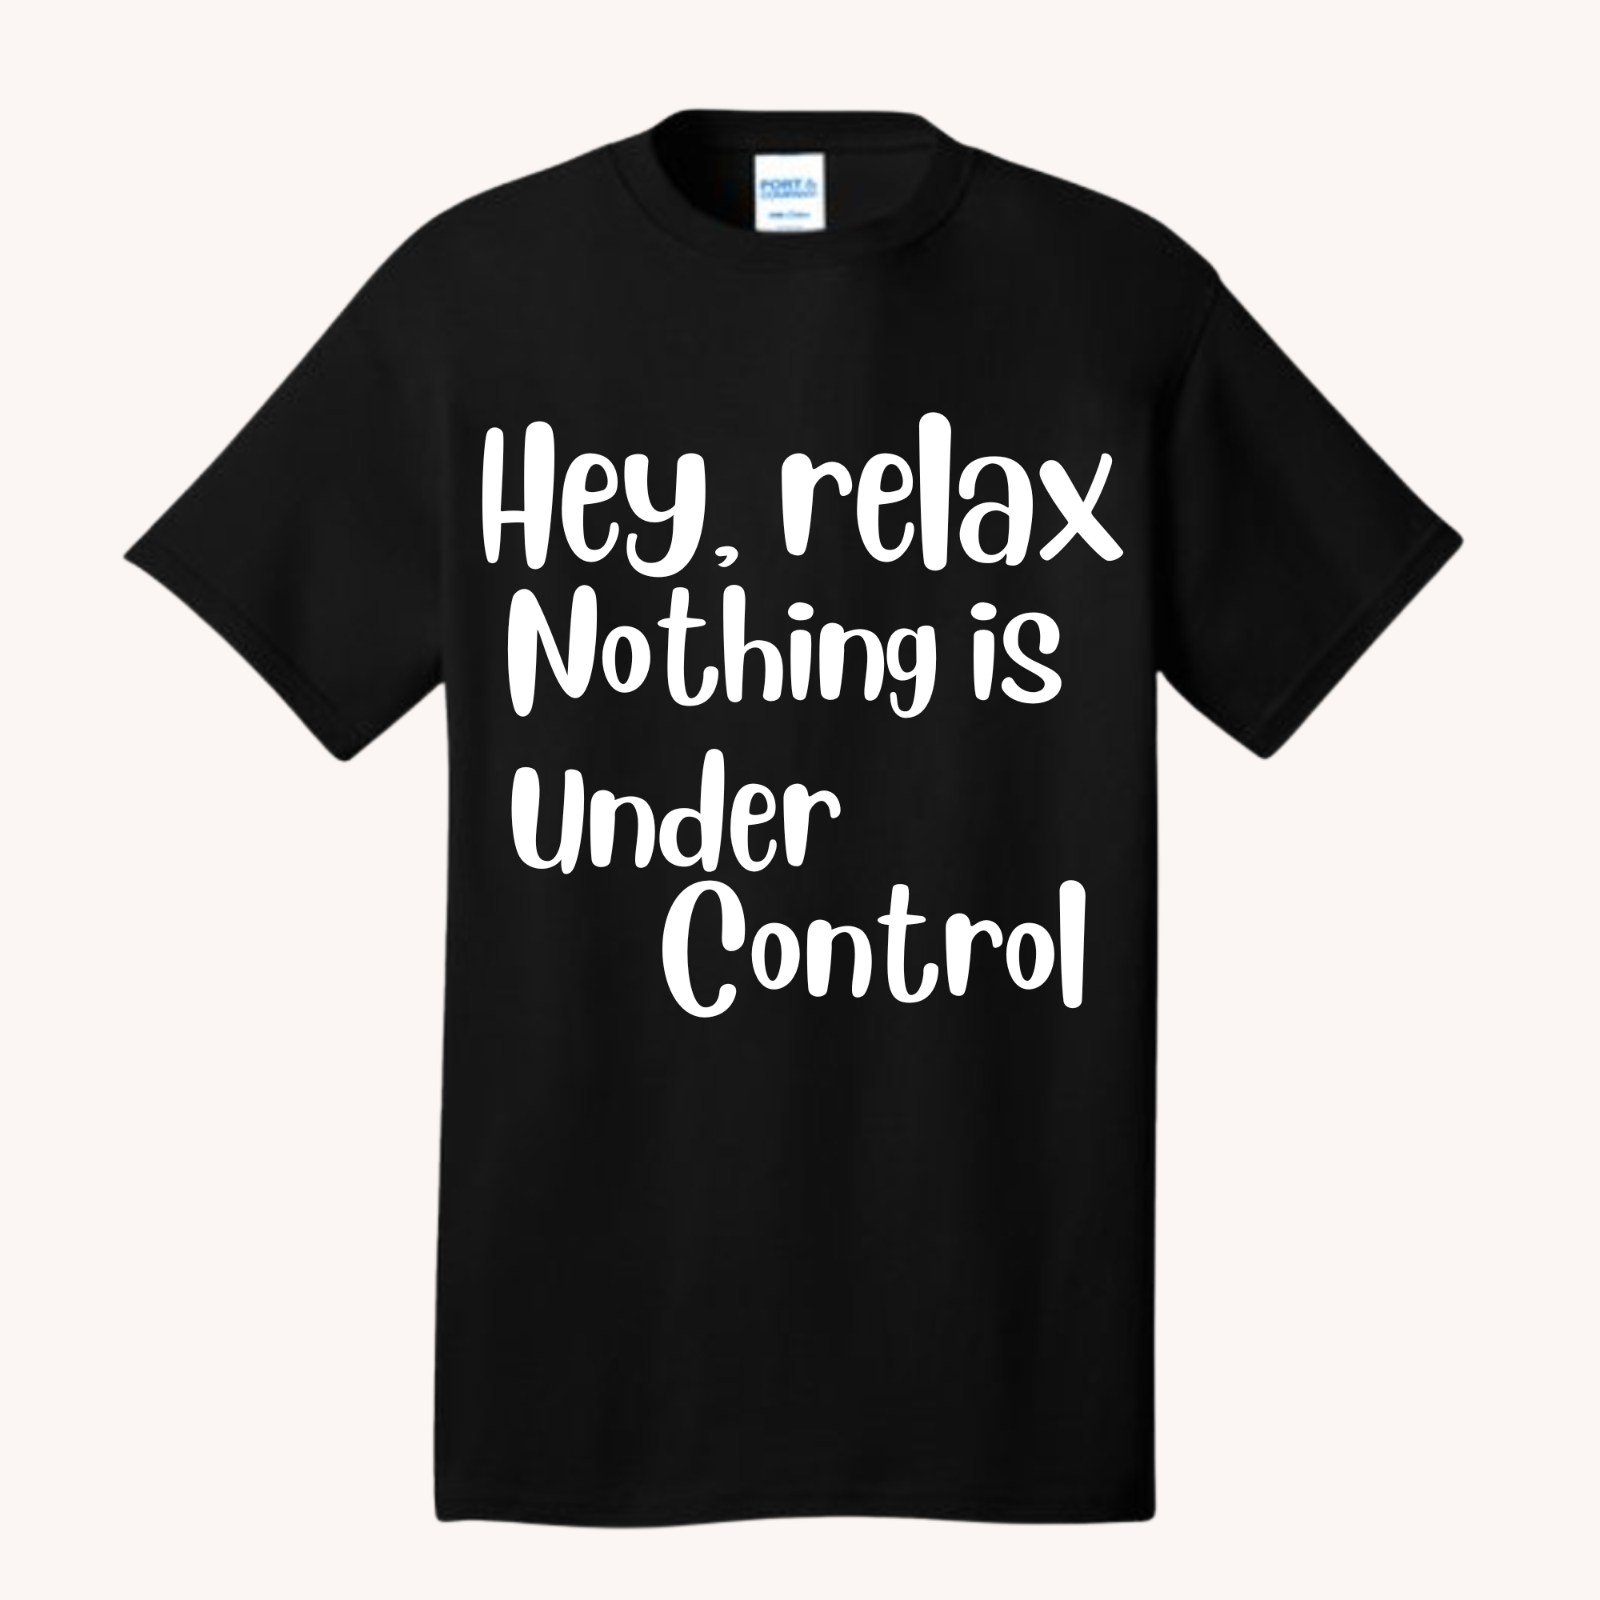 Hey Relax, Nothing is Under Control shirt Shirts & Tops Rose's Colored Designs  Small Black 